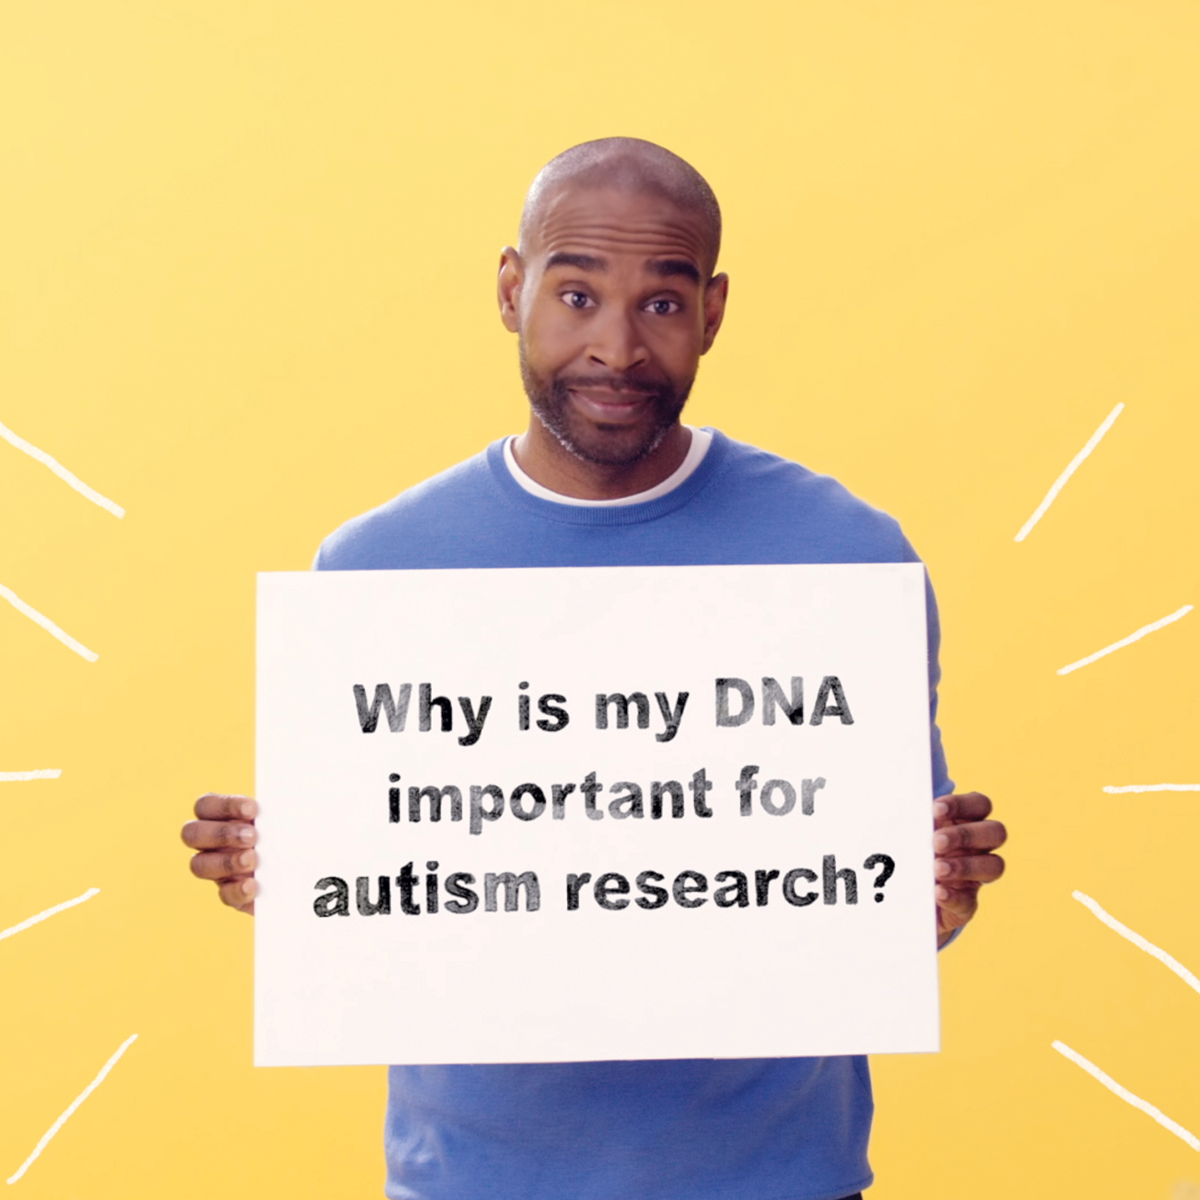 man holding sign that says, "Why is my DNA improtant for autism research?"